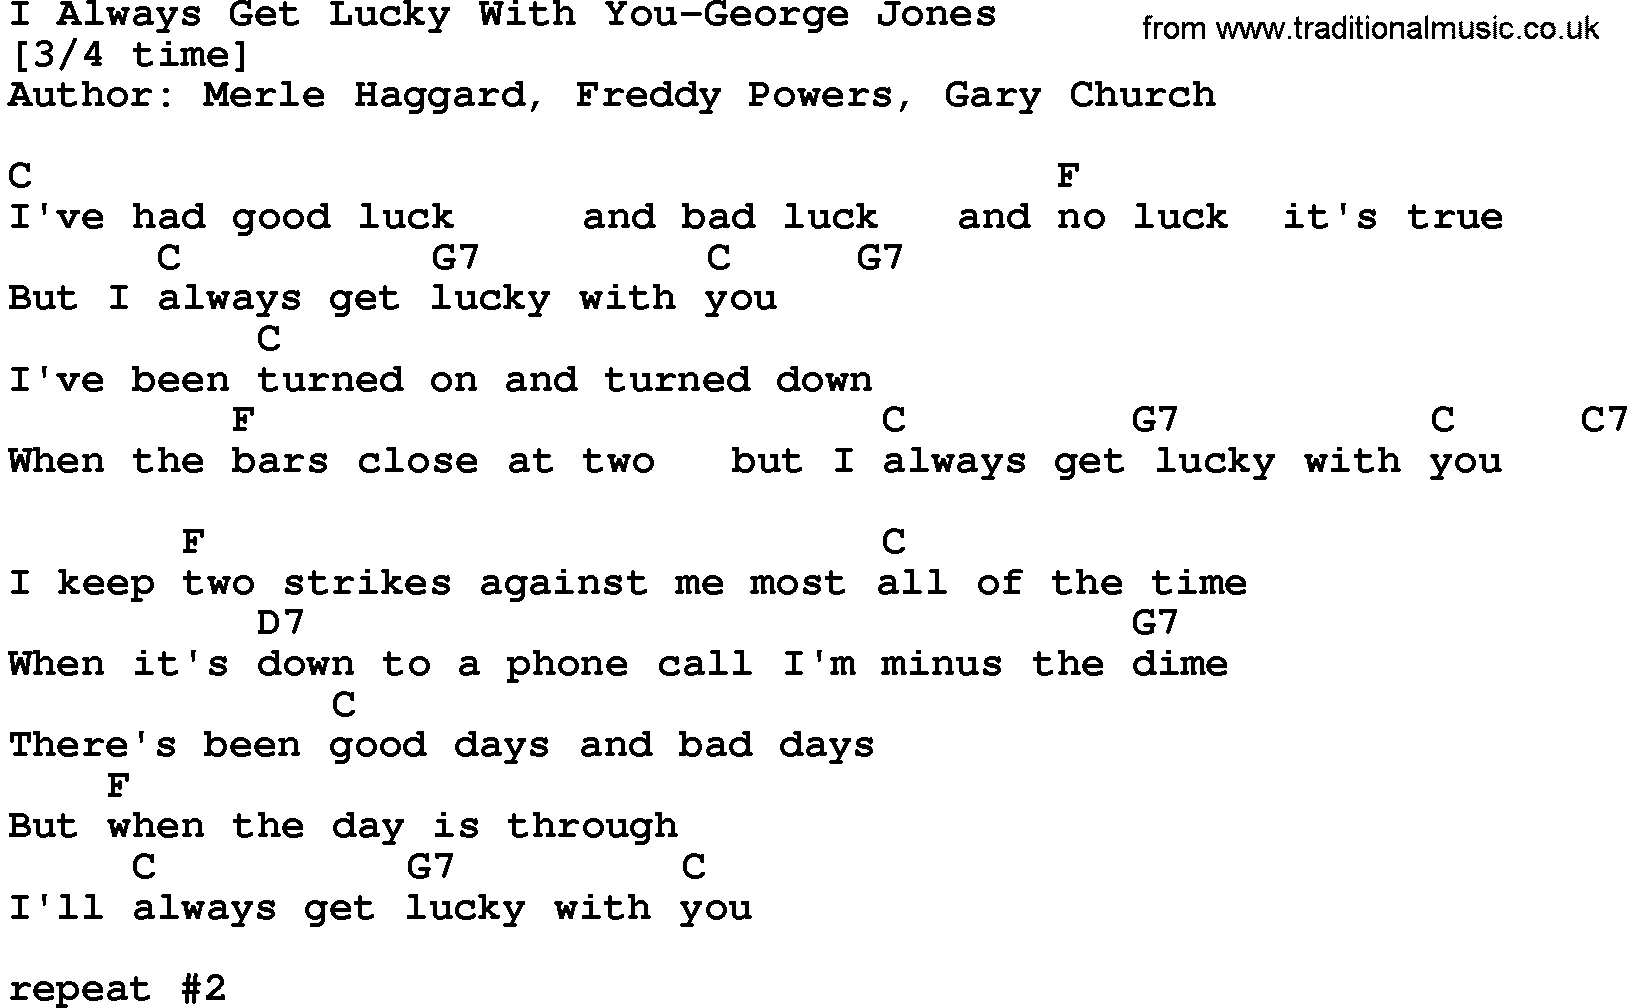 Country music song: I Always Get Lucky With You-George Jones lyrics and chords